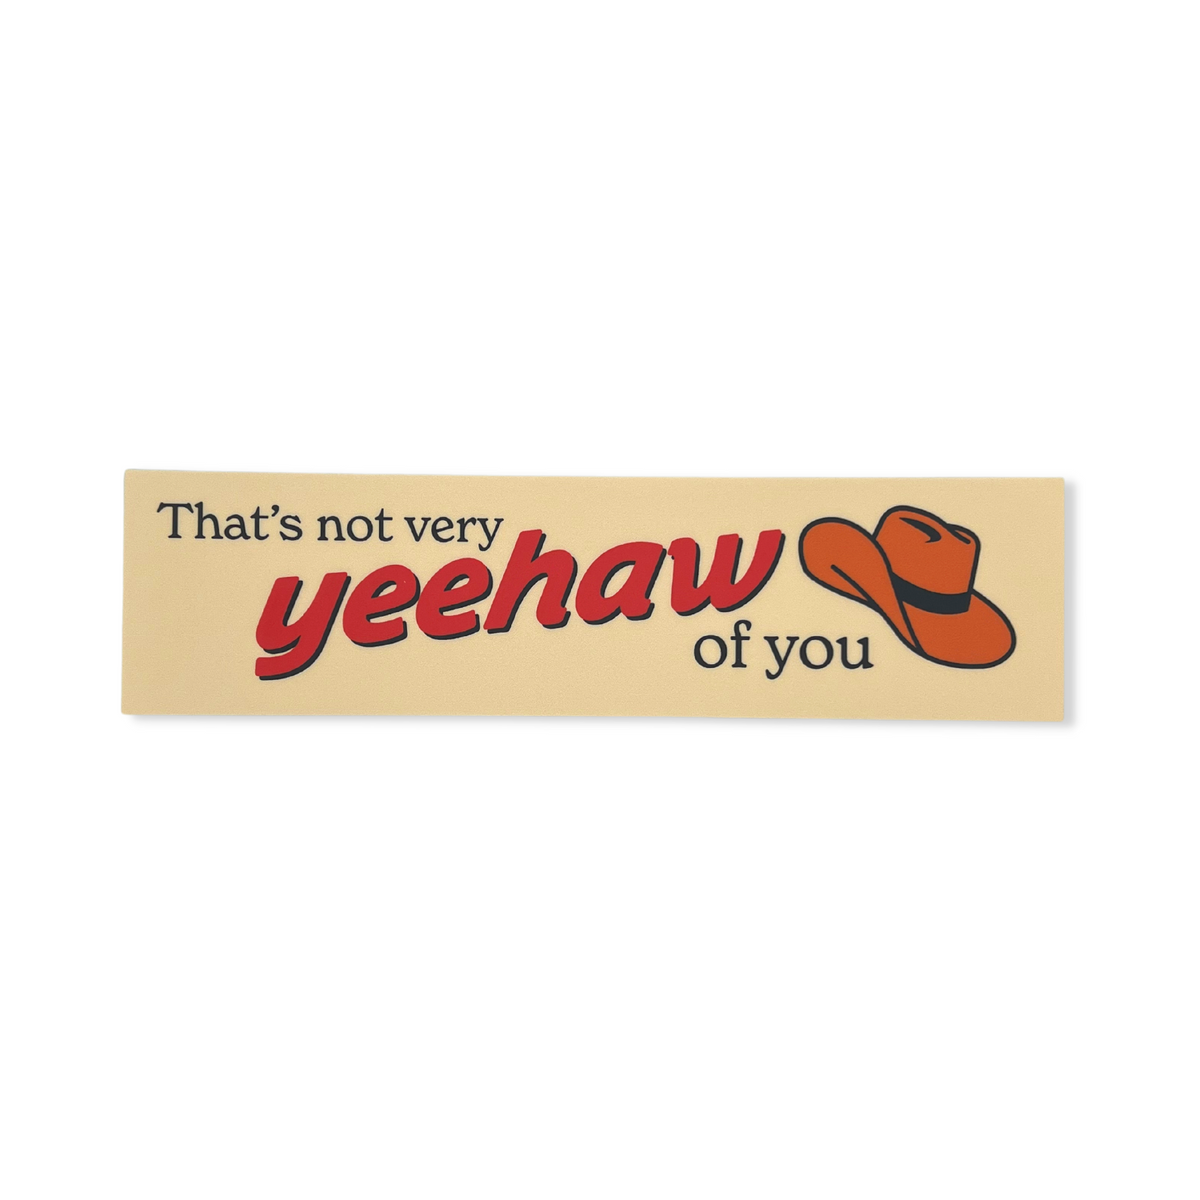 Not Very Yeehaw of You Bumper Sticker